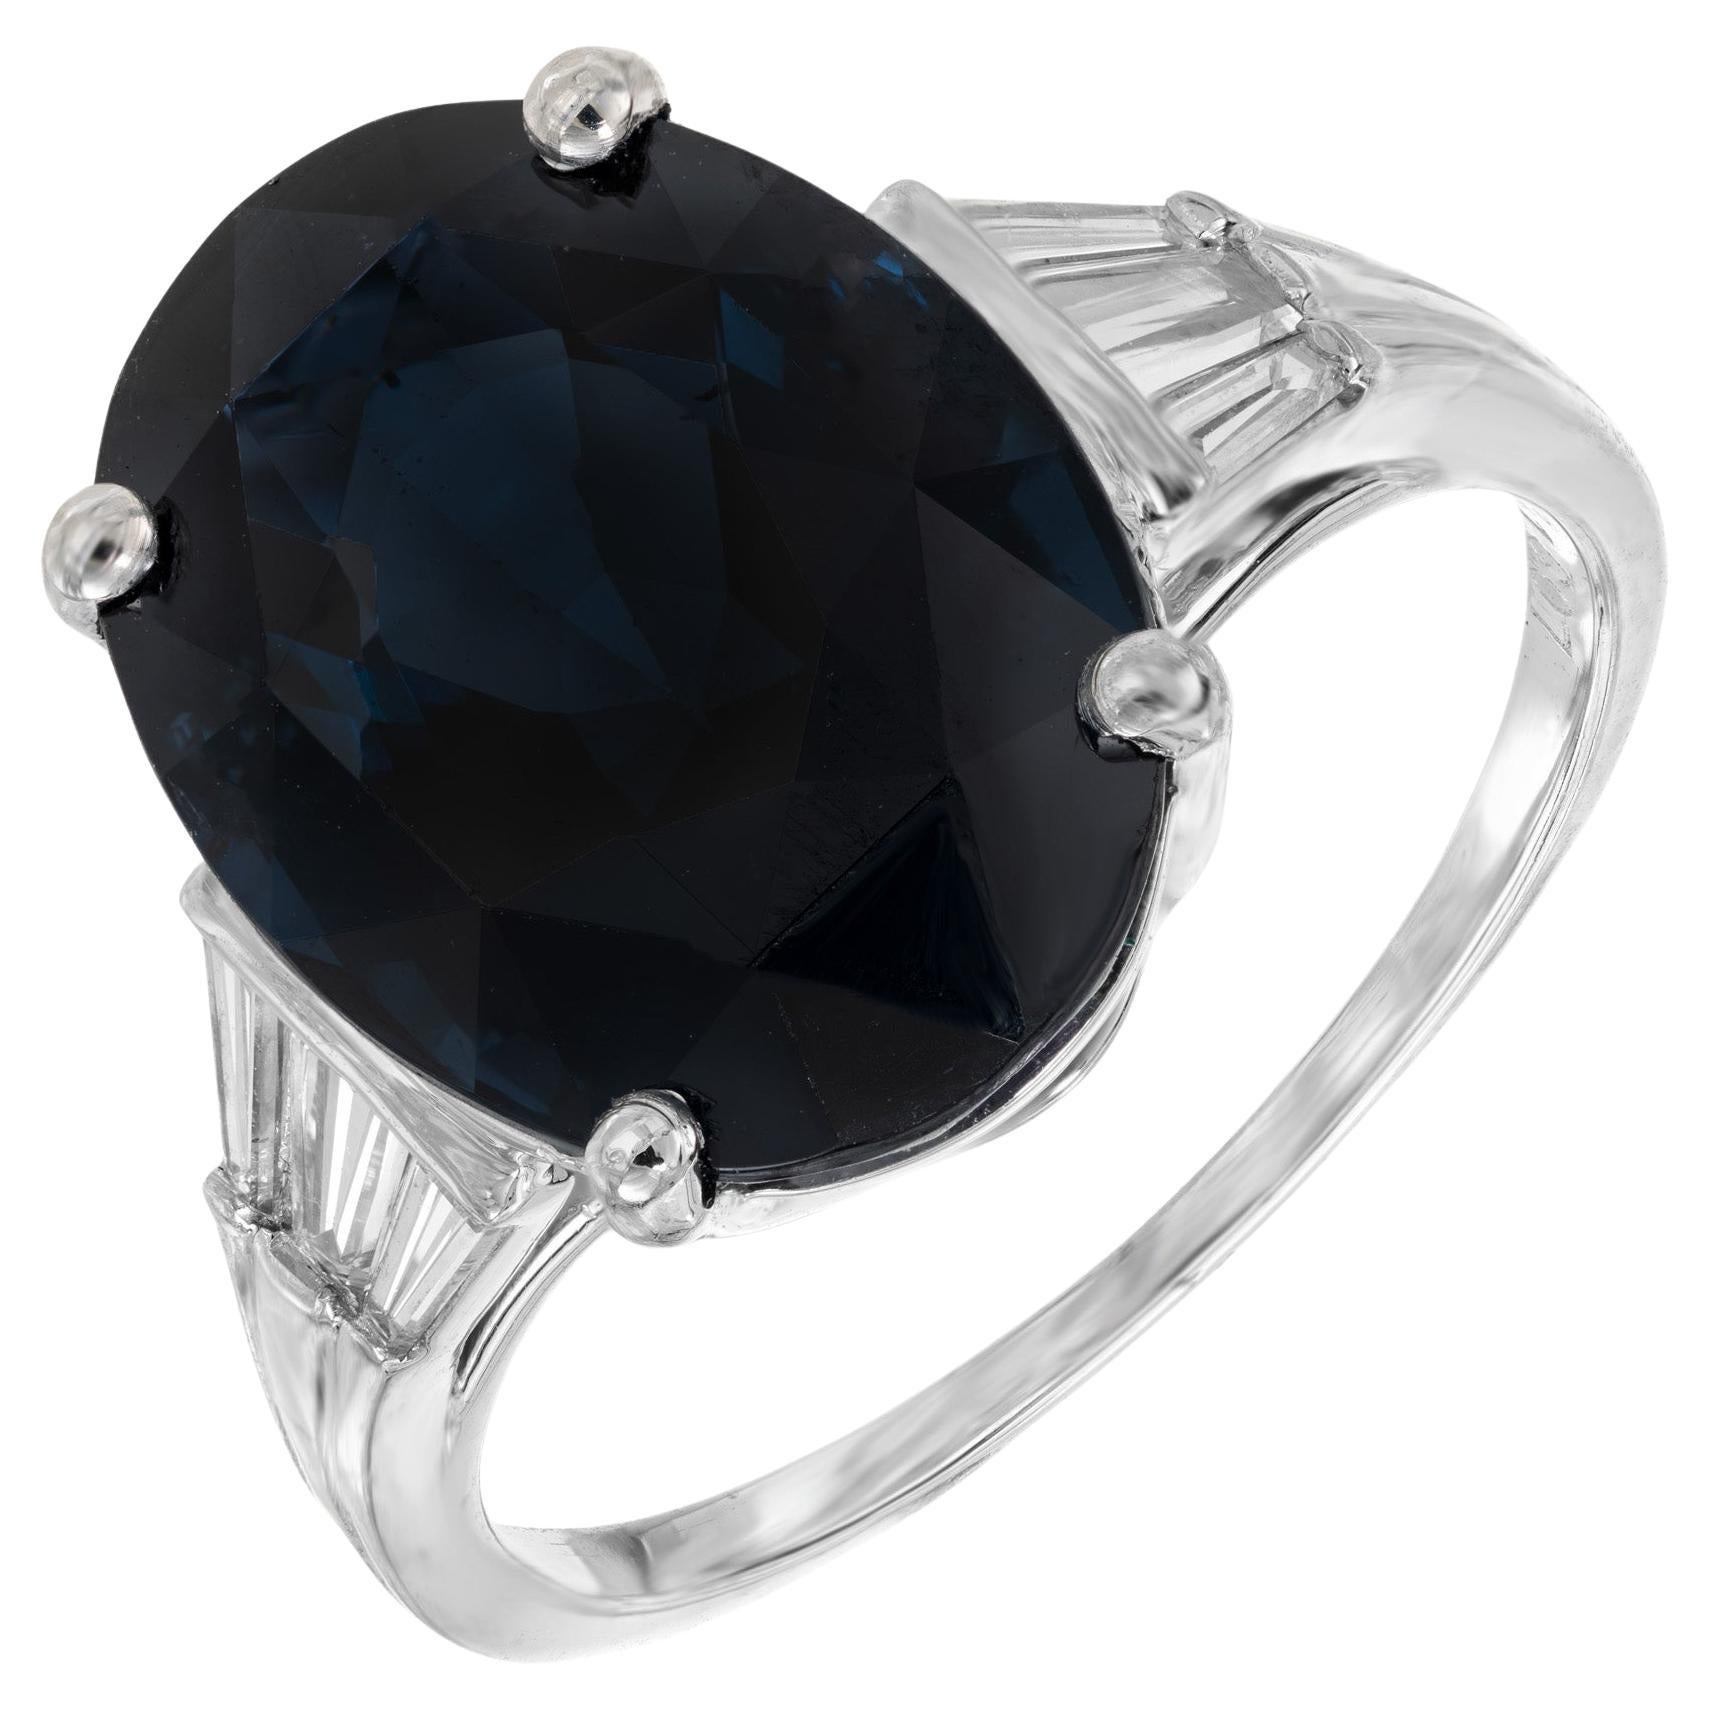 Mid-Century beautiful spinel and diamond engagement ring. GIA Certified oval dark blue spinel in its original handmade 1950's platinum setting, accented with 3 tapered baguette diamonds on each side. GIA has certified as a natural spinel. 

1 oval